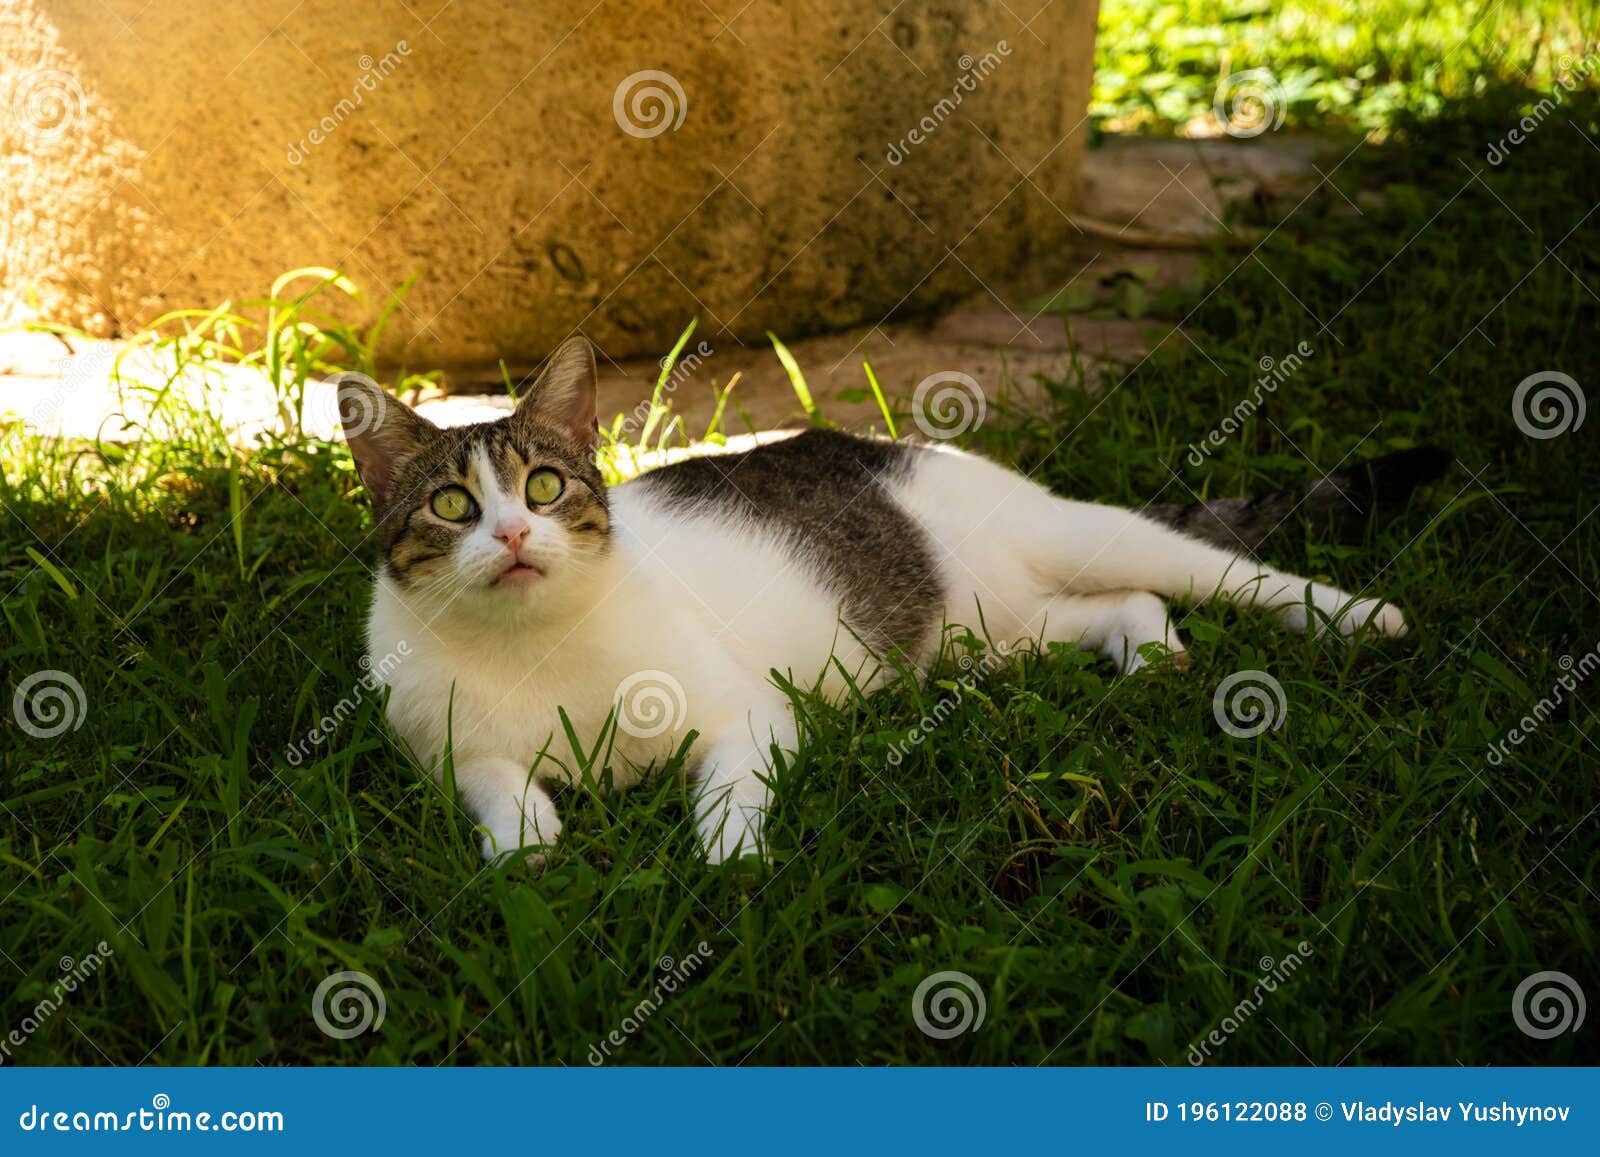 A Cat with a Very Funny Meme Surprised Expression on His Face is Resting in  the Shade on the Grass Stock Photo - Image of animal, white: 196122088